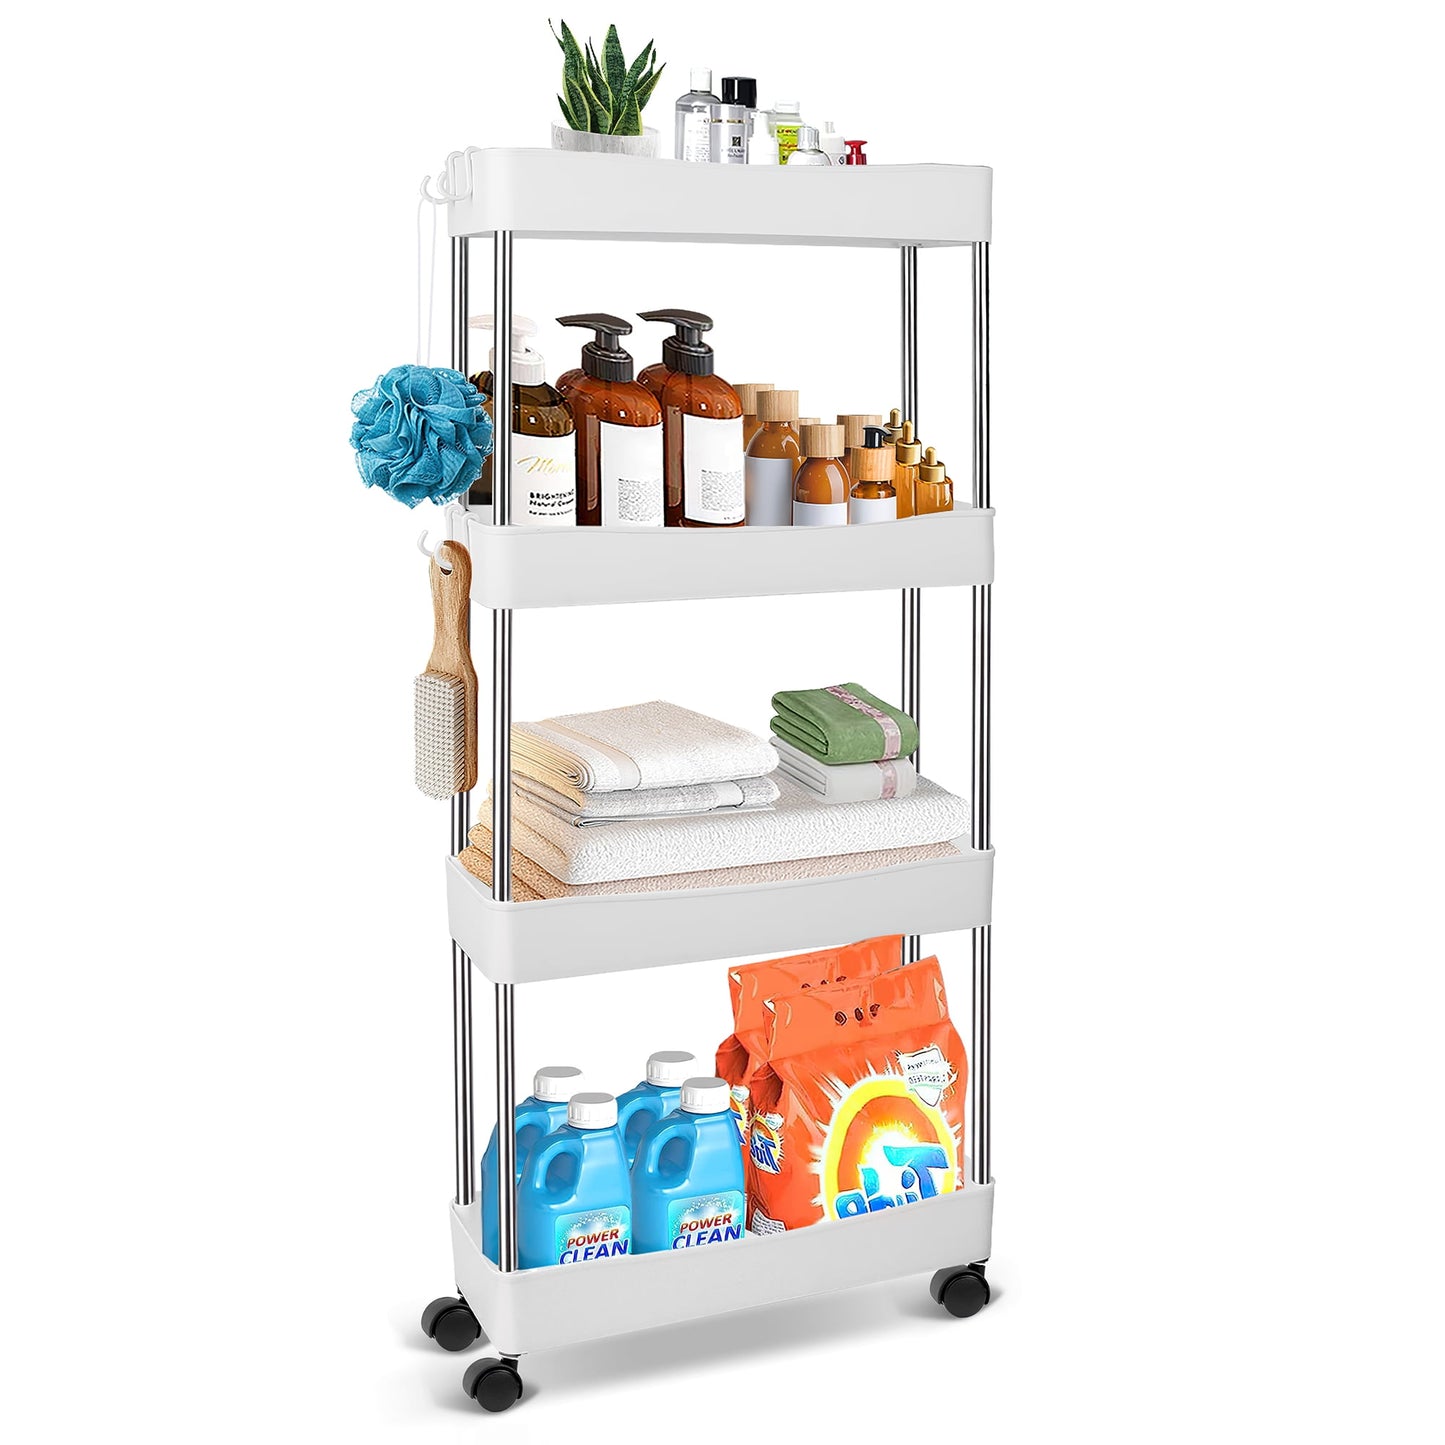 LAYADO 4 Tier Rolling Cart, Slim Rolling Storage Cart with Wheels White Rolling Utility Cart Narrow Storage Organizer for Offices Bathroom Laundry Room